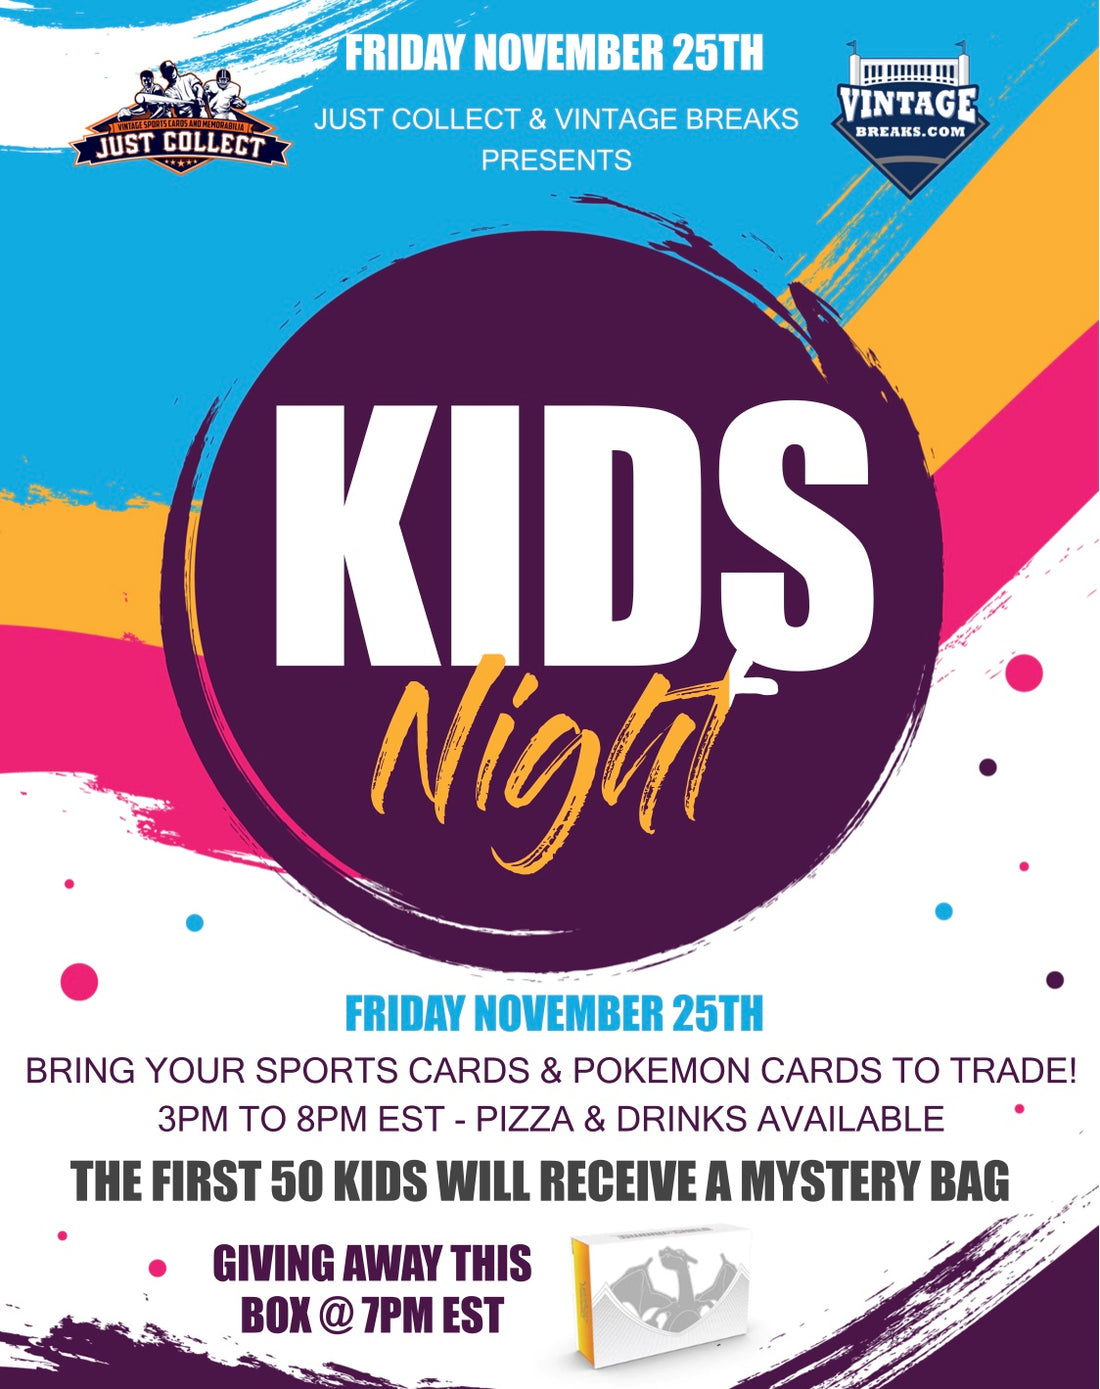 Vintage Breaks Invites You to KIDS NIGHT with Free Gifts on November 25